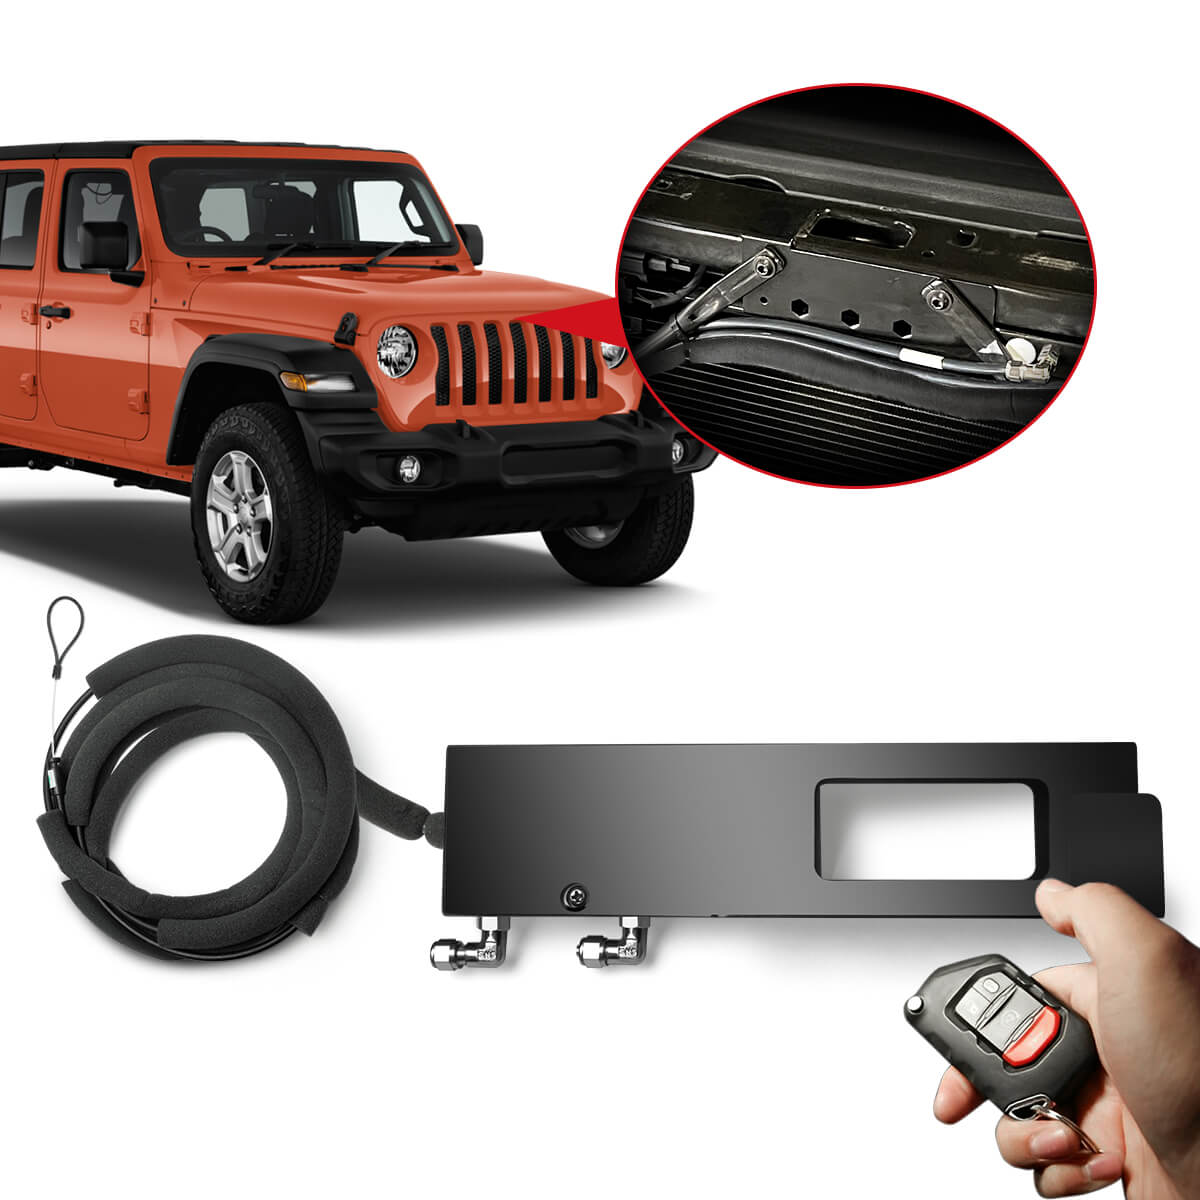 YOCTM Door Lock Decoration Cover for 2018 2019 2020 2021 2022 Jeep Wra - 4